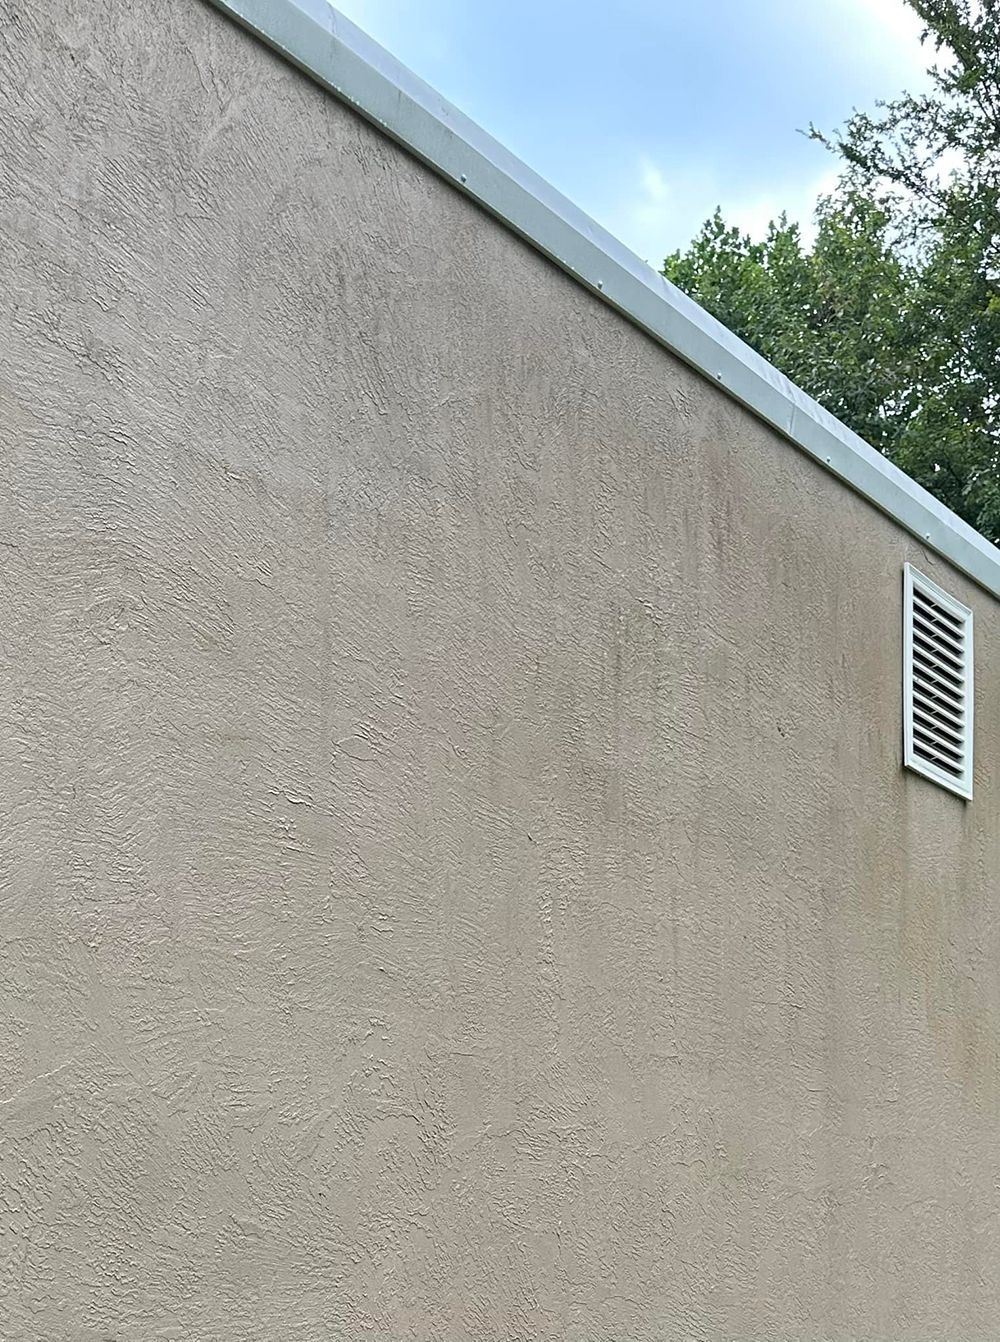 A close up of a wall with a vent on it